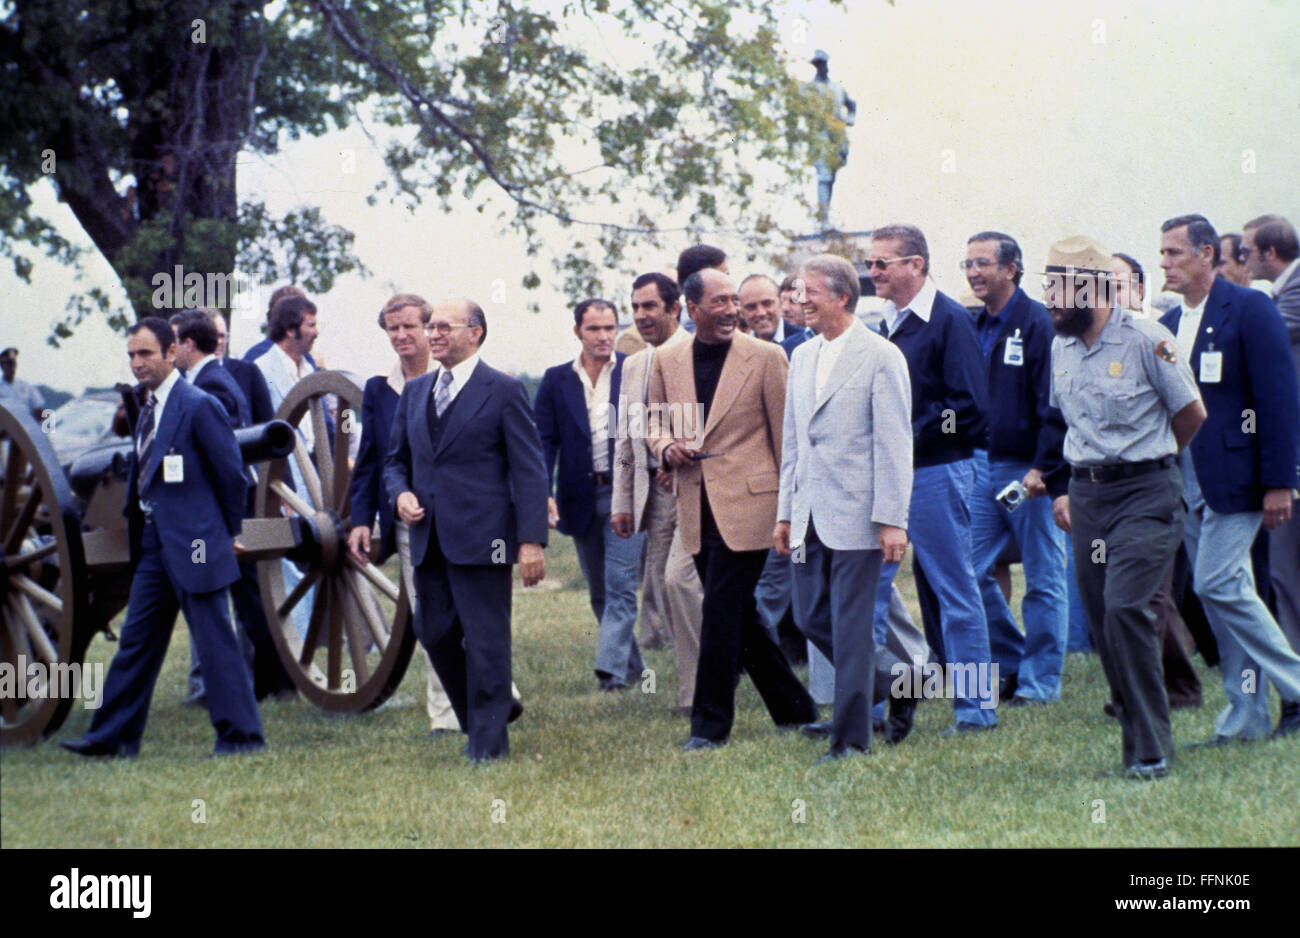 Gettysburg, Pennsylvania, USA. 10th Sep, 1978. United States President Jimmy Carter, right, President Anwar Sadat of Egypt, center, and Prime Minister Menachem Begin of Israel, left, tour the U.S. Civil War battlefield in Gettysburg, Pennsylvania accompanied by members of their respective delegations during a break in the Camp David Summit on September 10, 1978. Boutros Boutros-Ghali died at age 93 on February 16, 2016.Credit: Benjamin E. ''Gene'' Forte - CNP © Benjamin E. ''Gene'' Forte/CNP/ZUMA Wire/Alamy Live News Stock Photo